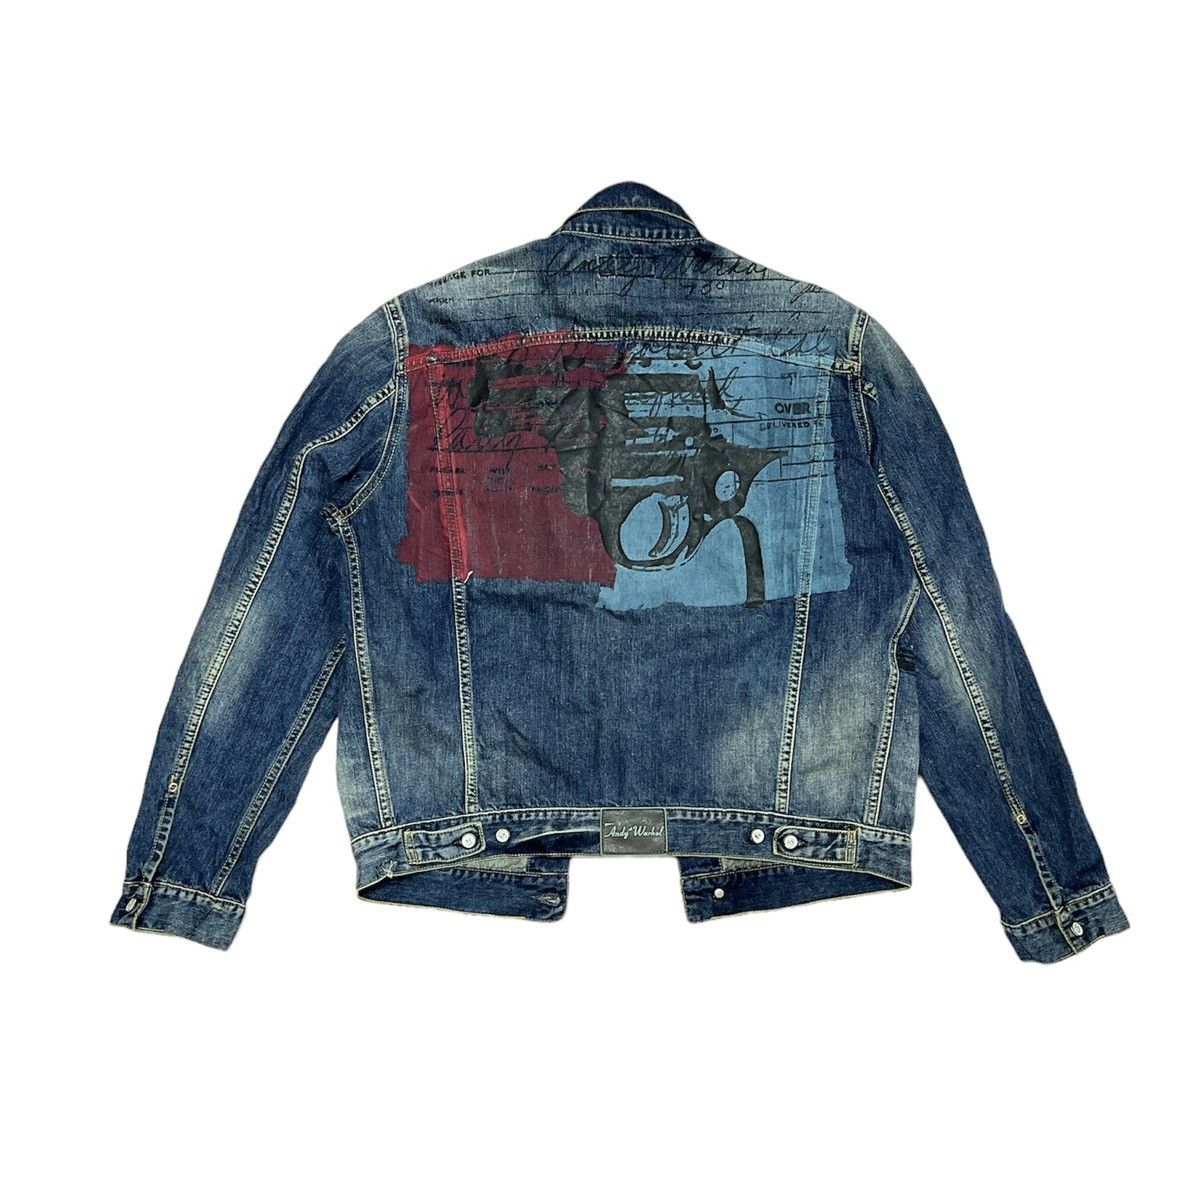 Andy Warhol by Pepe Jeans Type III Jacket - 6